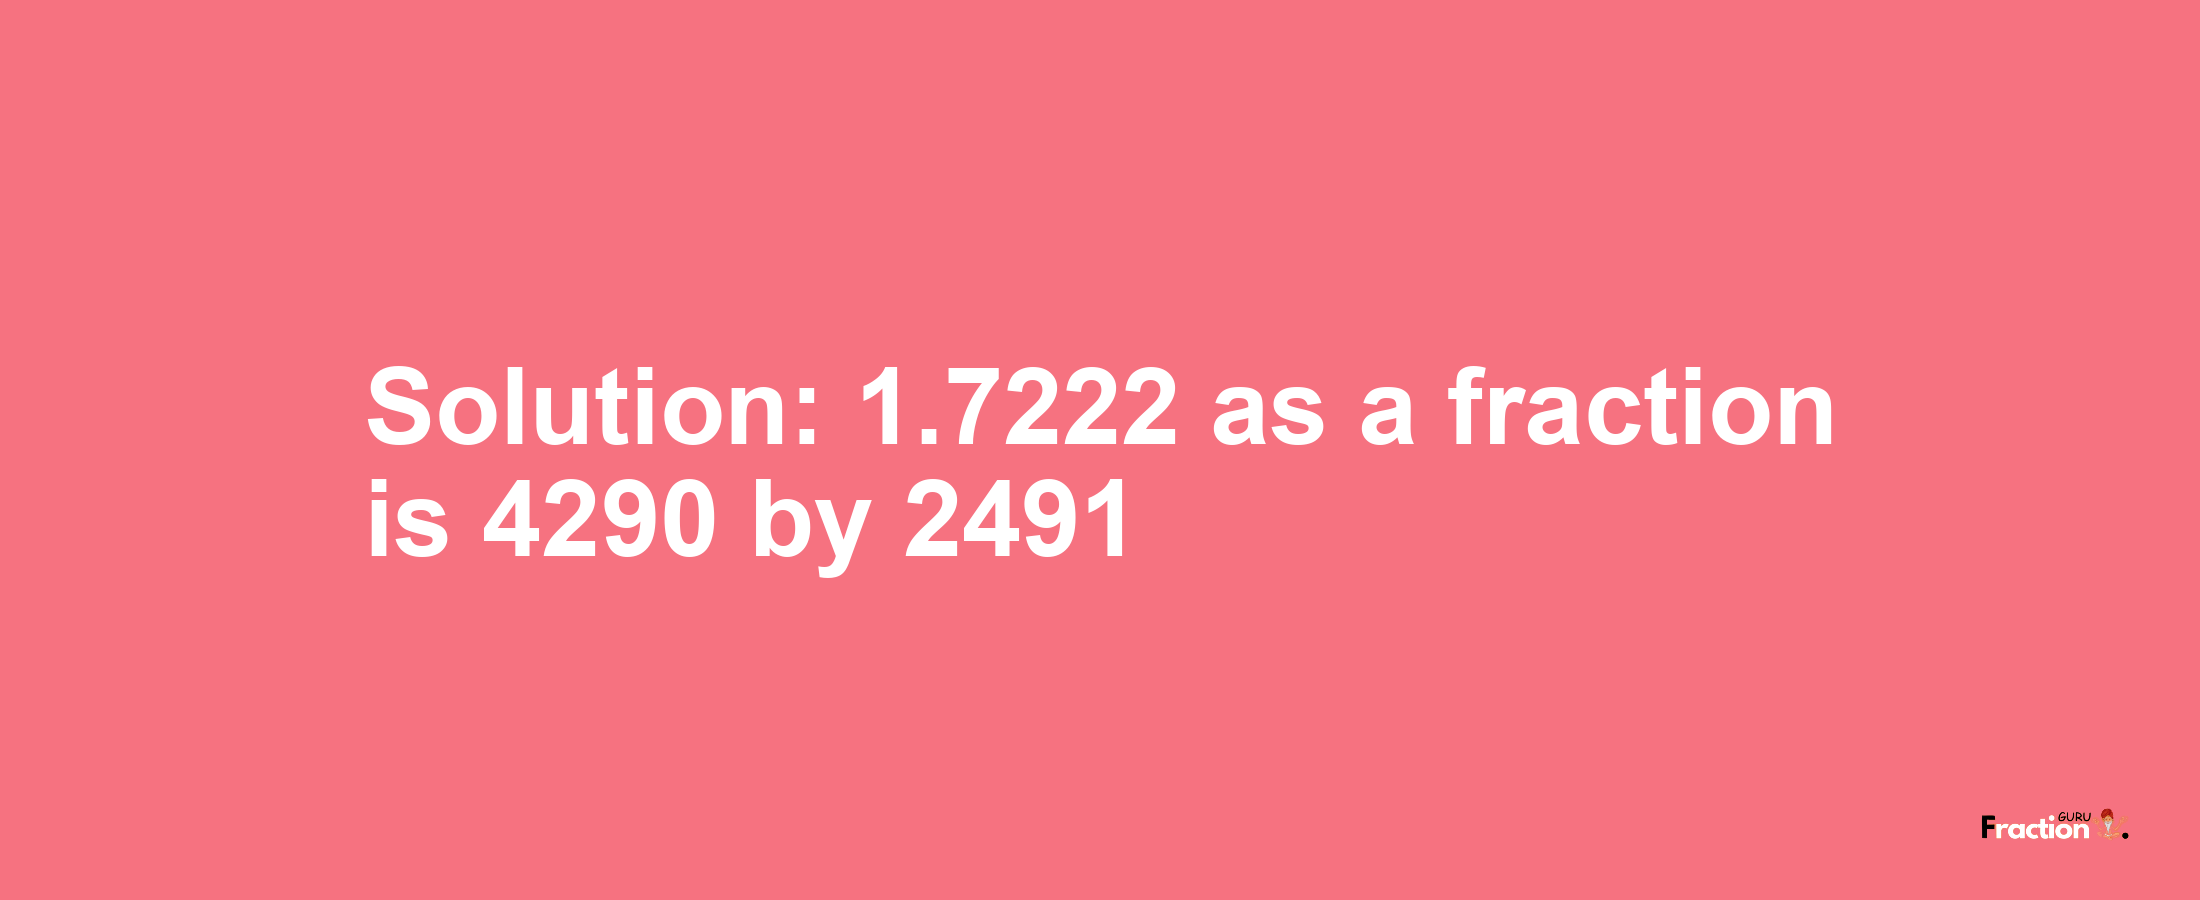 Solution:1.7222 as a fraction is 4290/2491